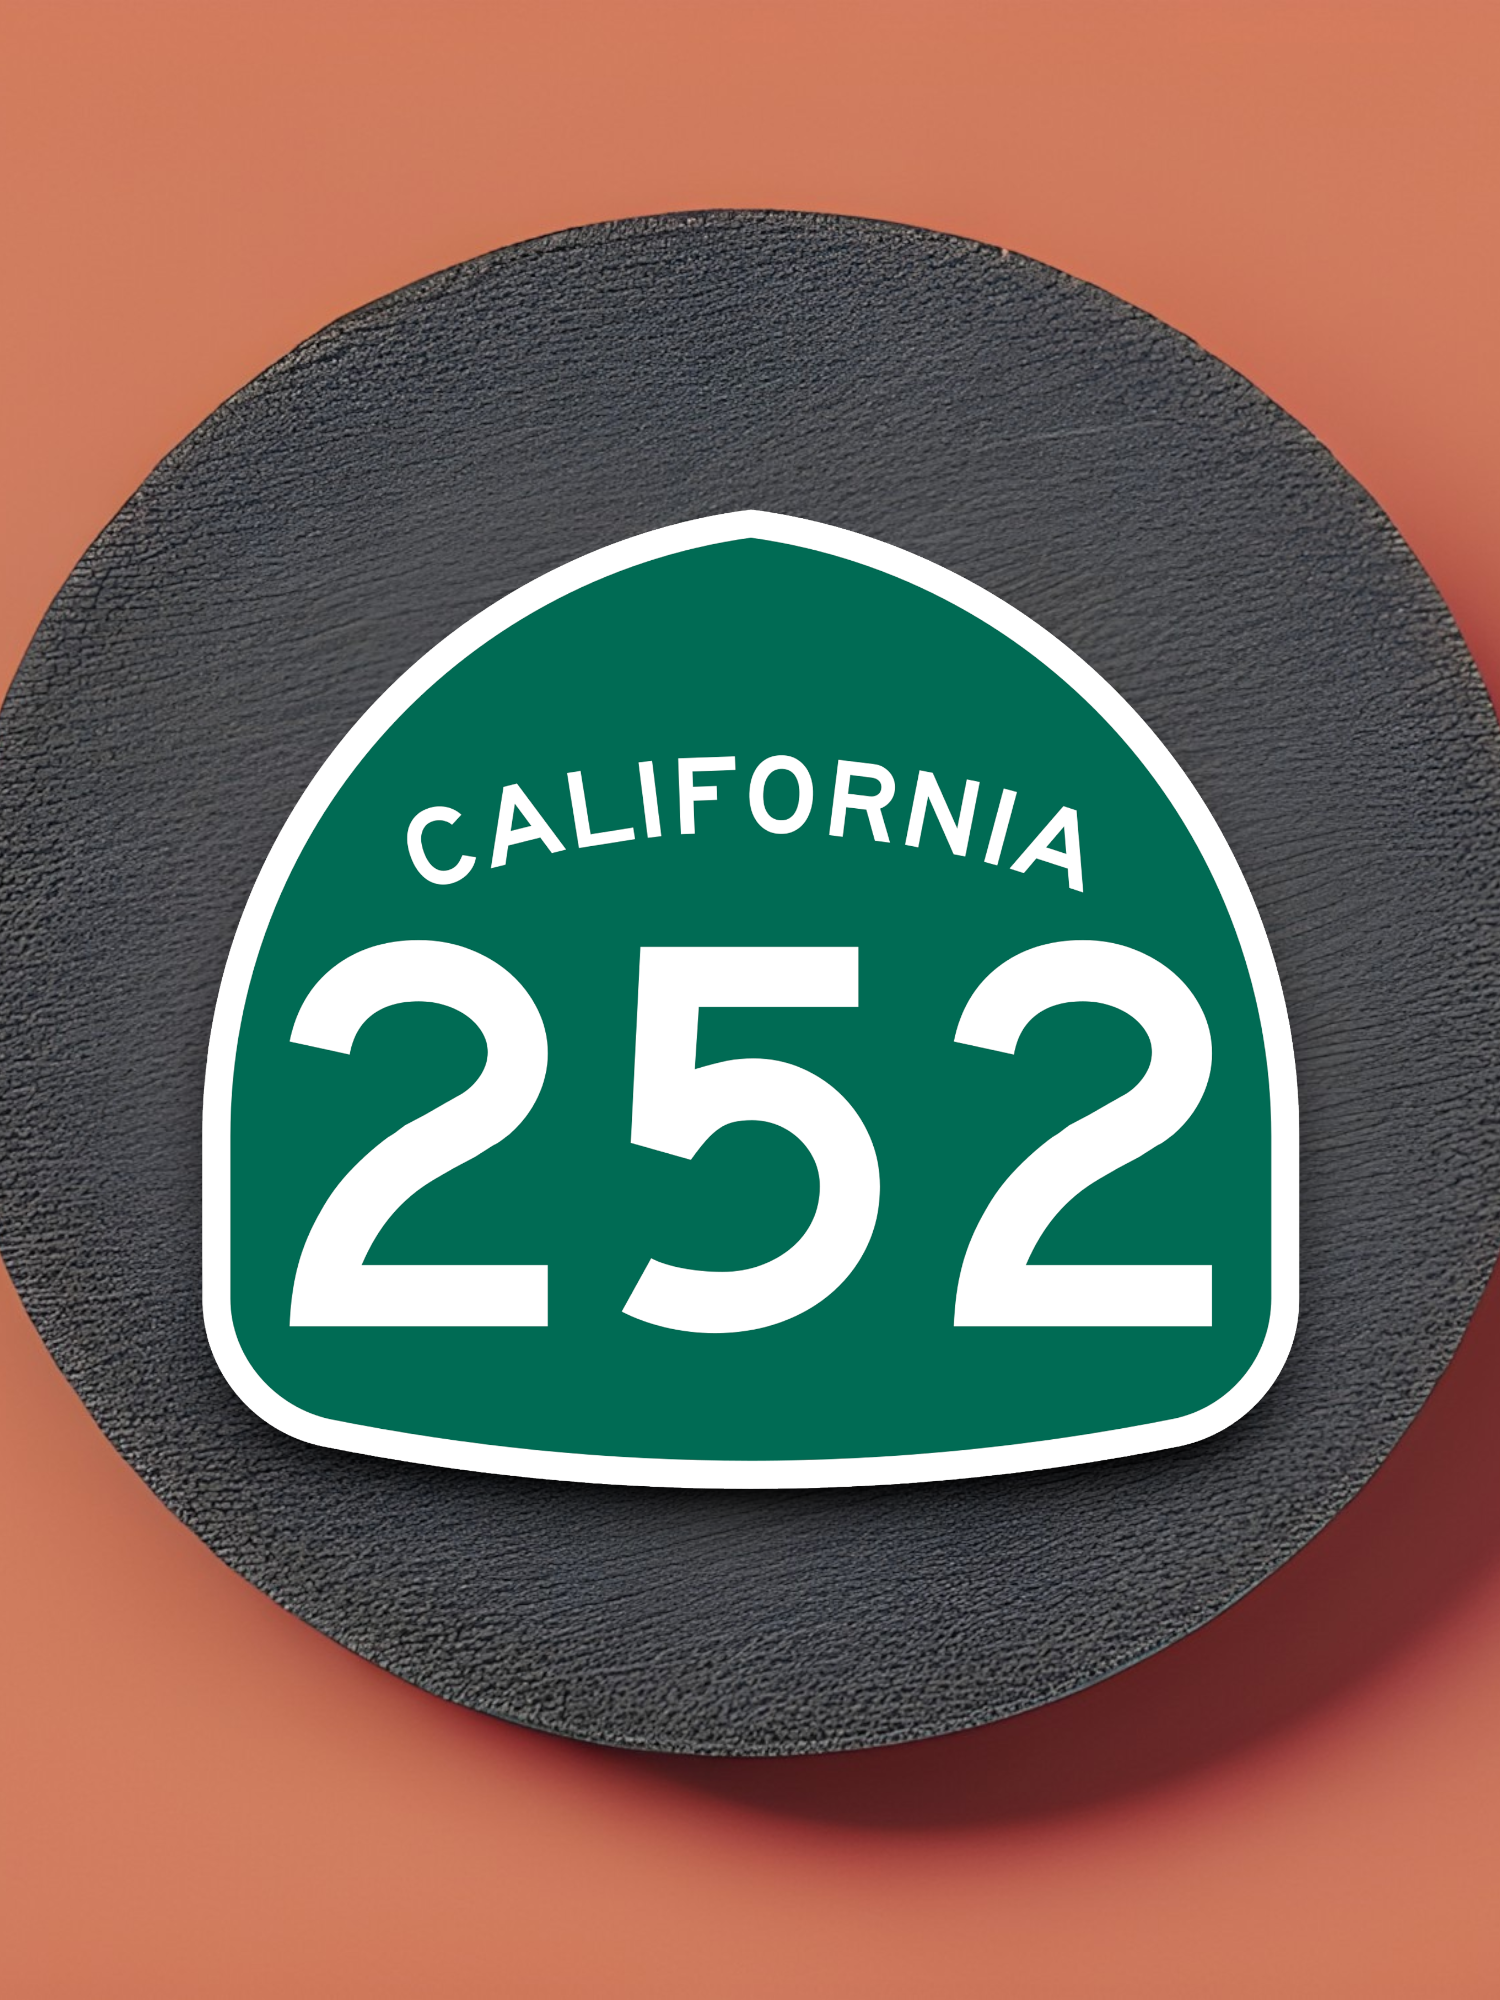 California State Route 252 Road Sign Sticker